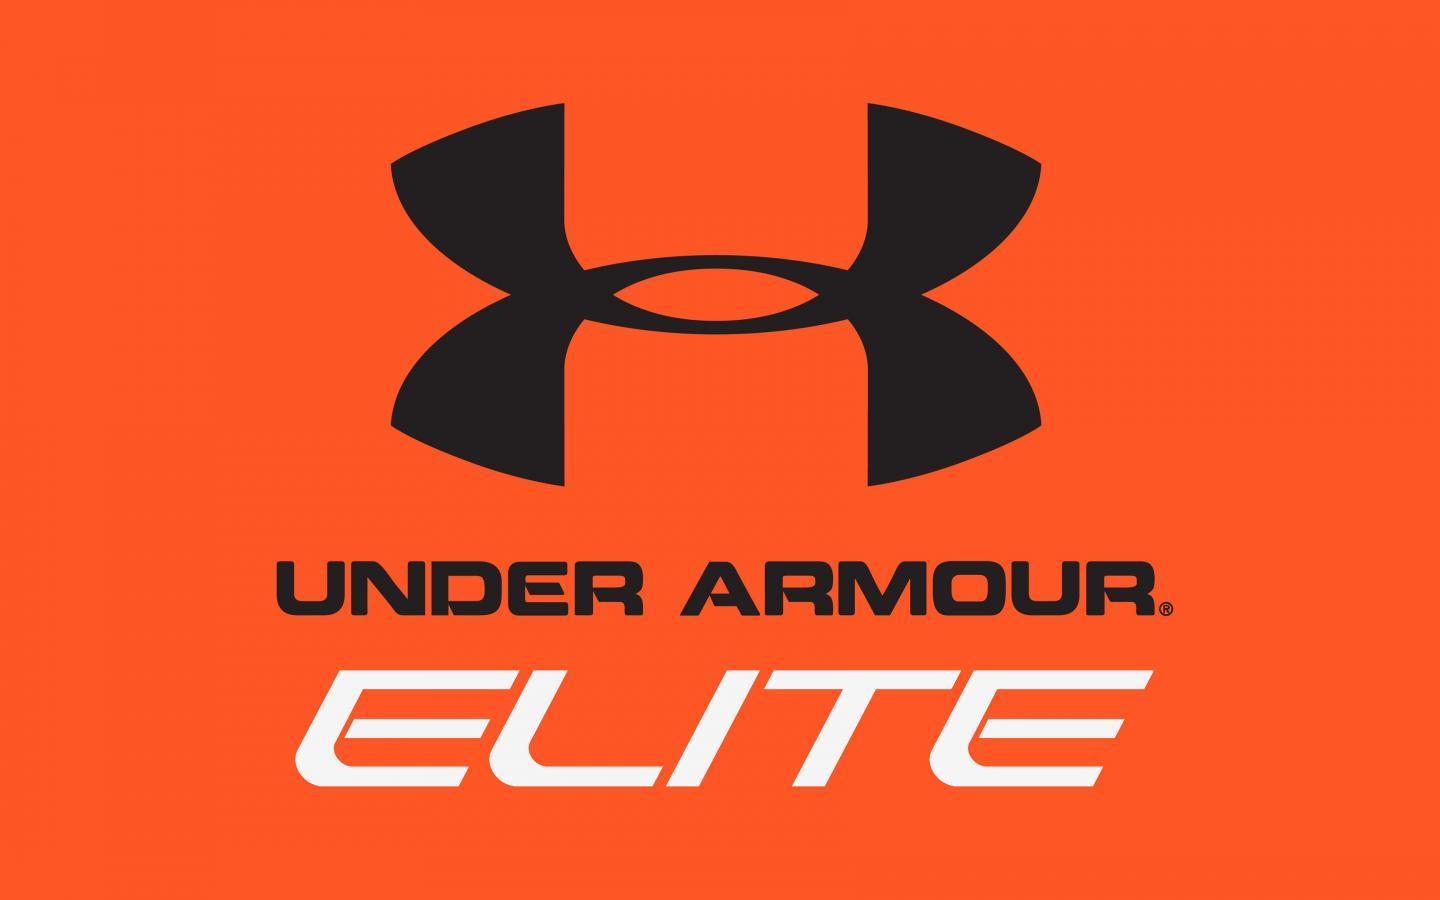 Under Armour Background « Firefox Wallpaper « Free Download